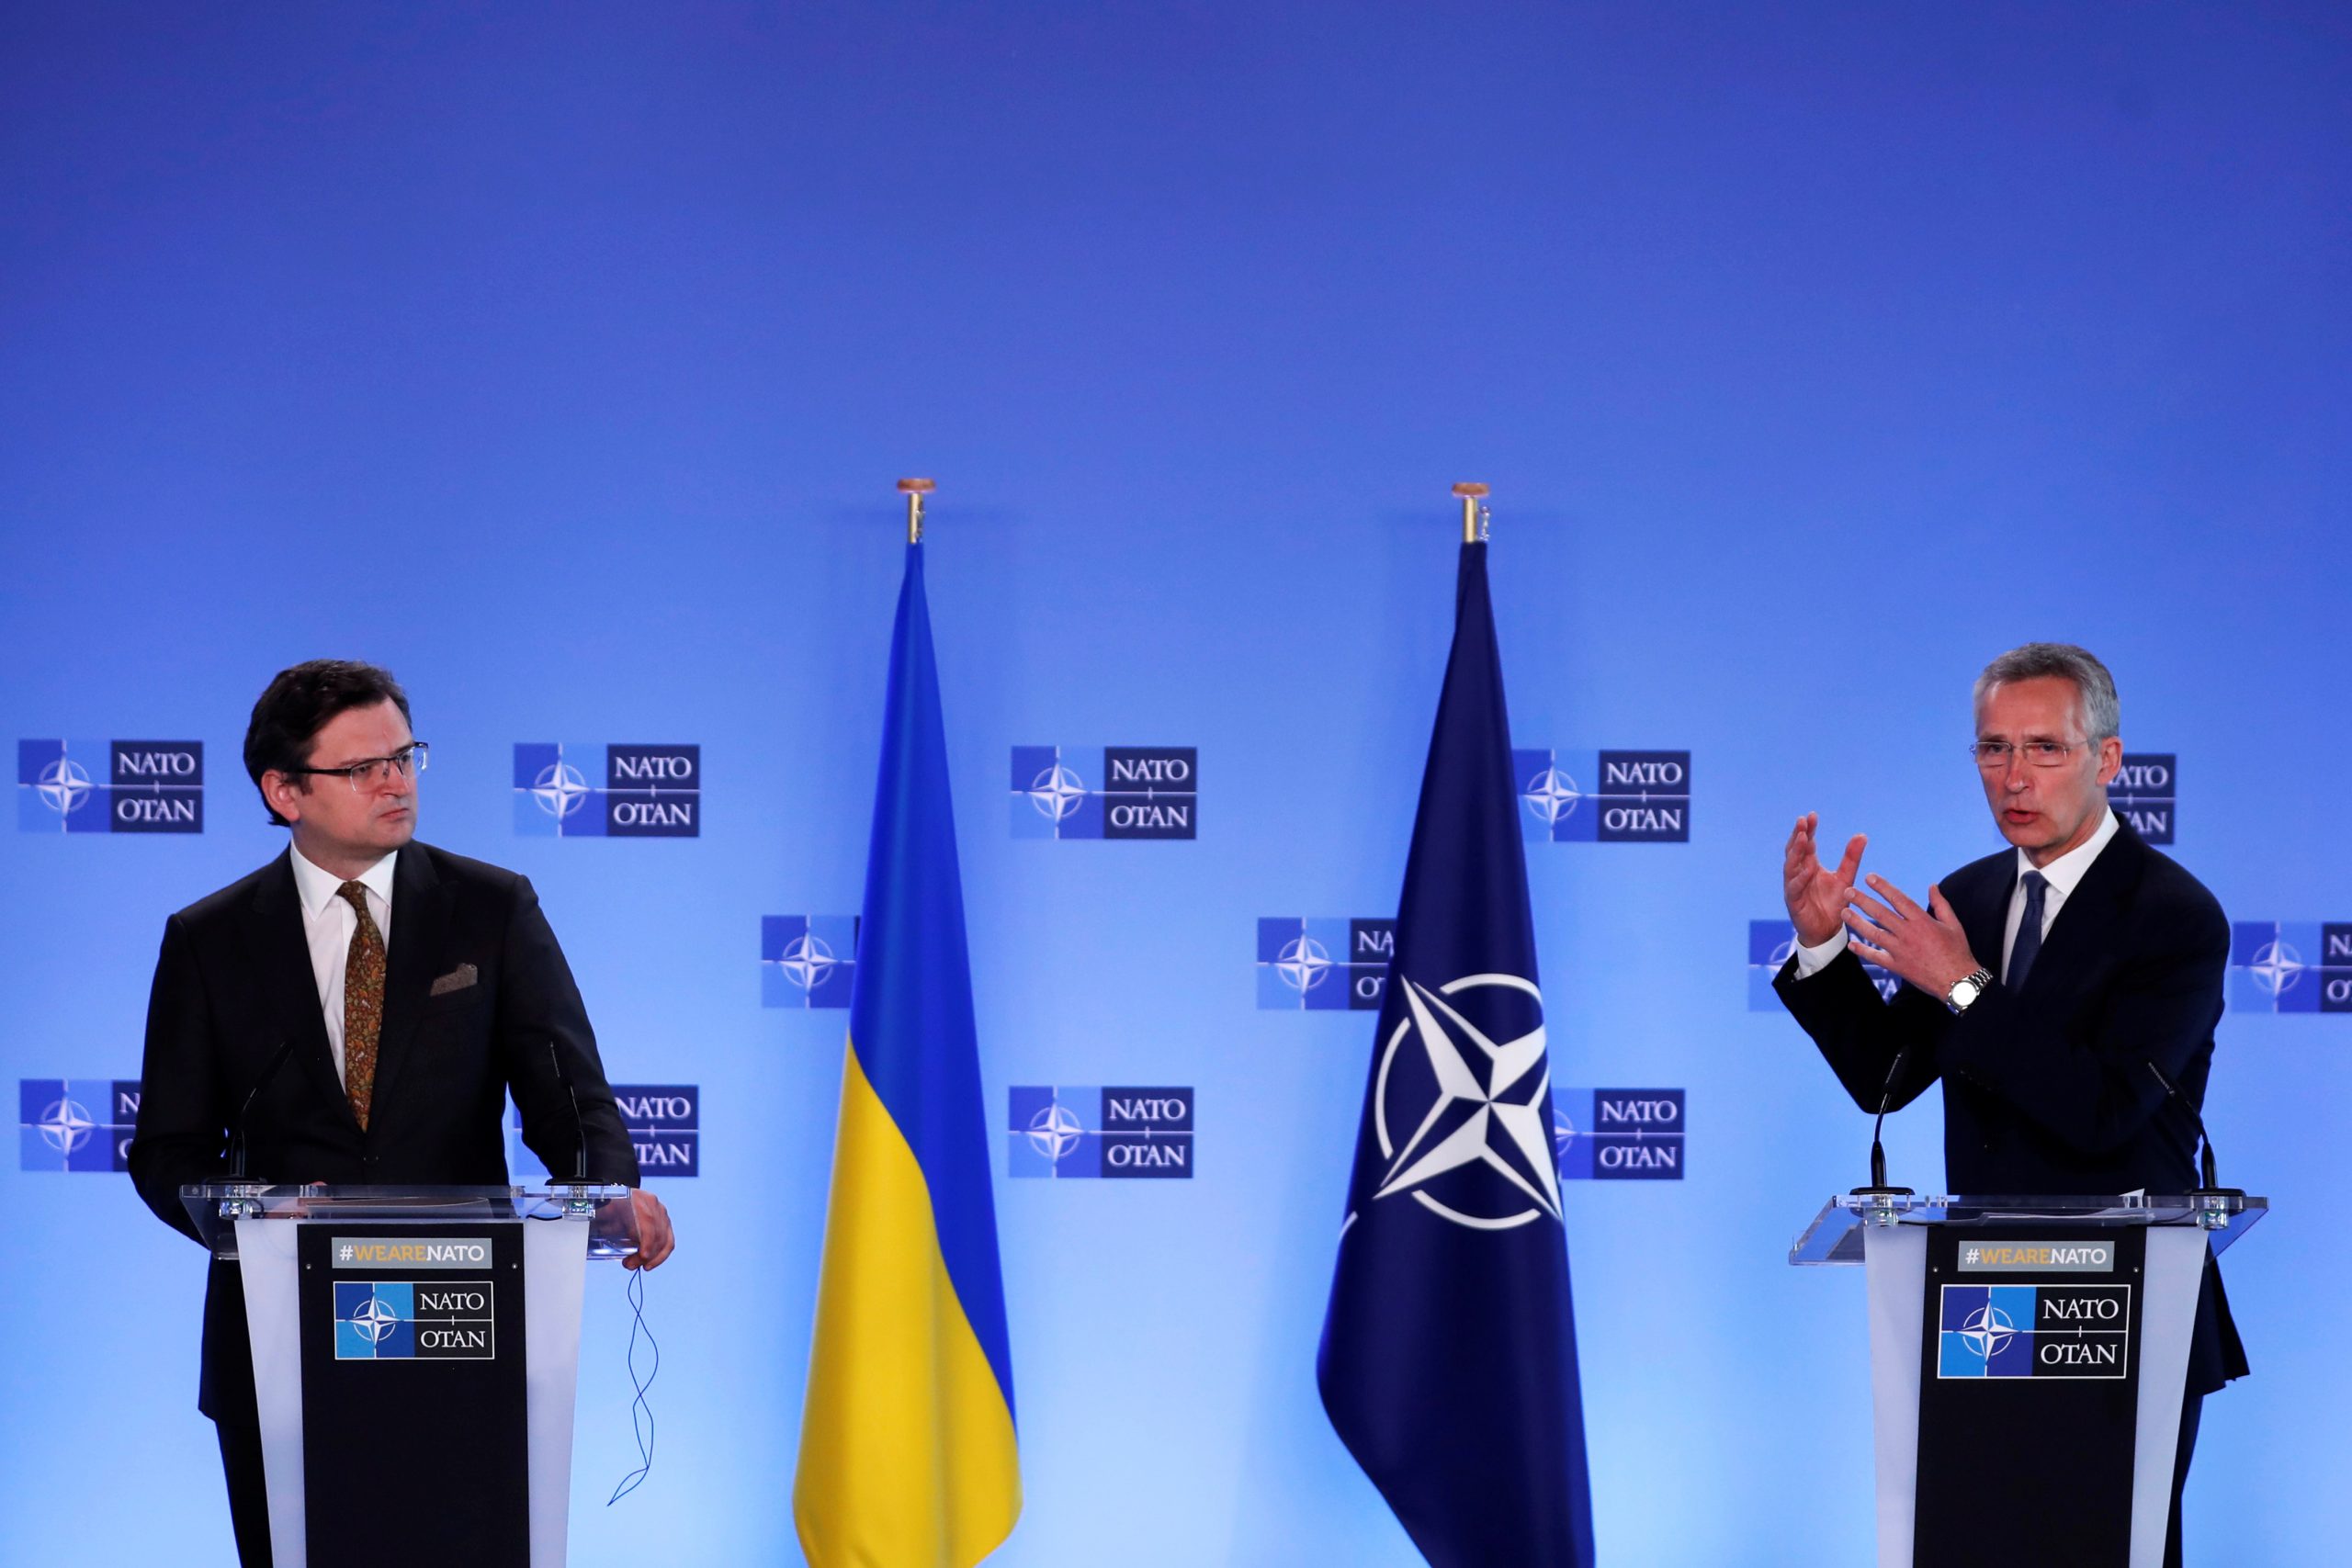 Calling on NATO to Provide a Complete List of Necessary Reforms for Ukraine's Membership